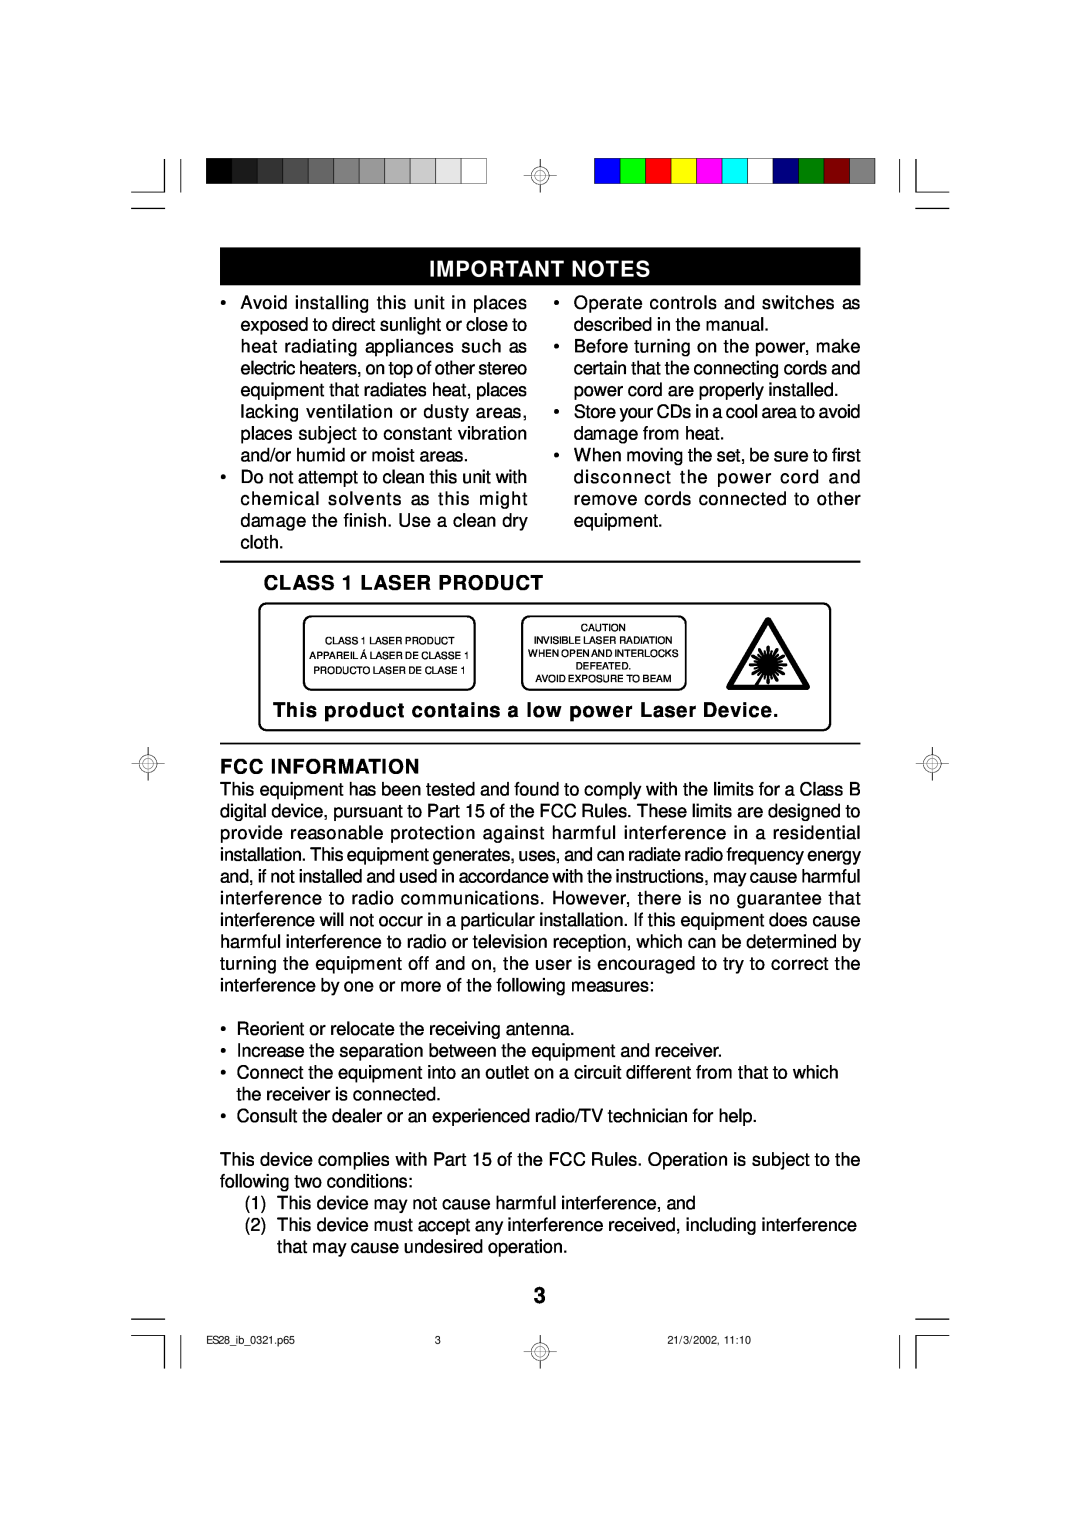 Emerson ES28 Important Notes, CLASS 1 LASER PRODUCT, This product contains a low power Laser Device, Fcc Information 